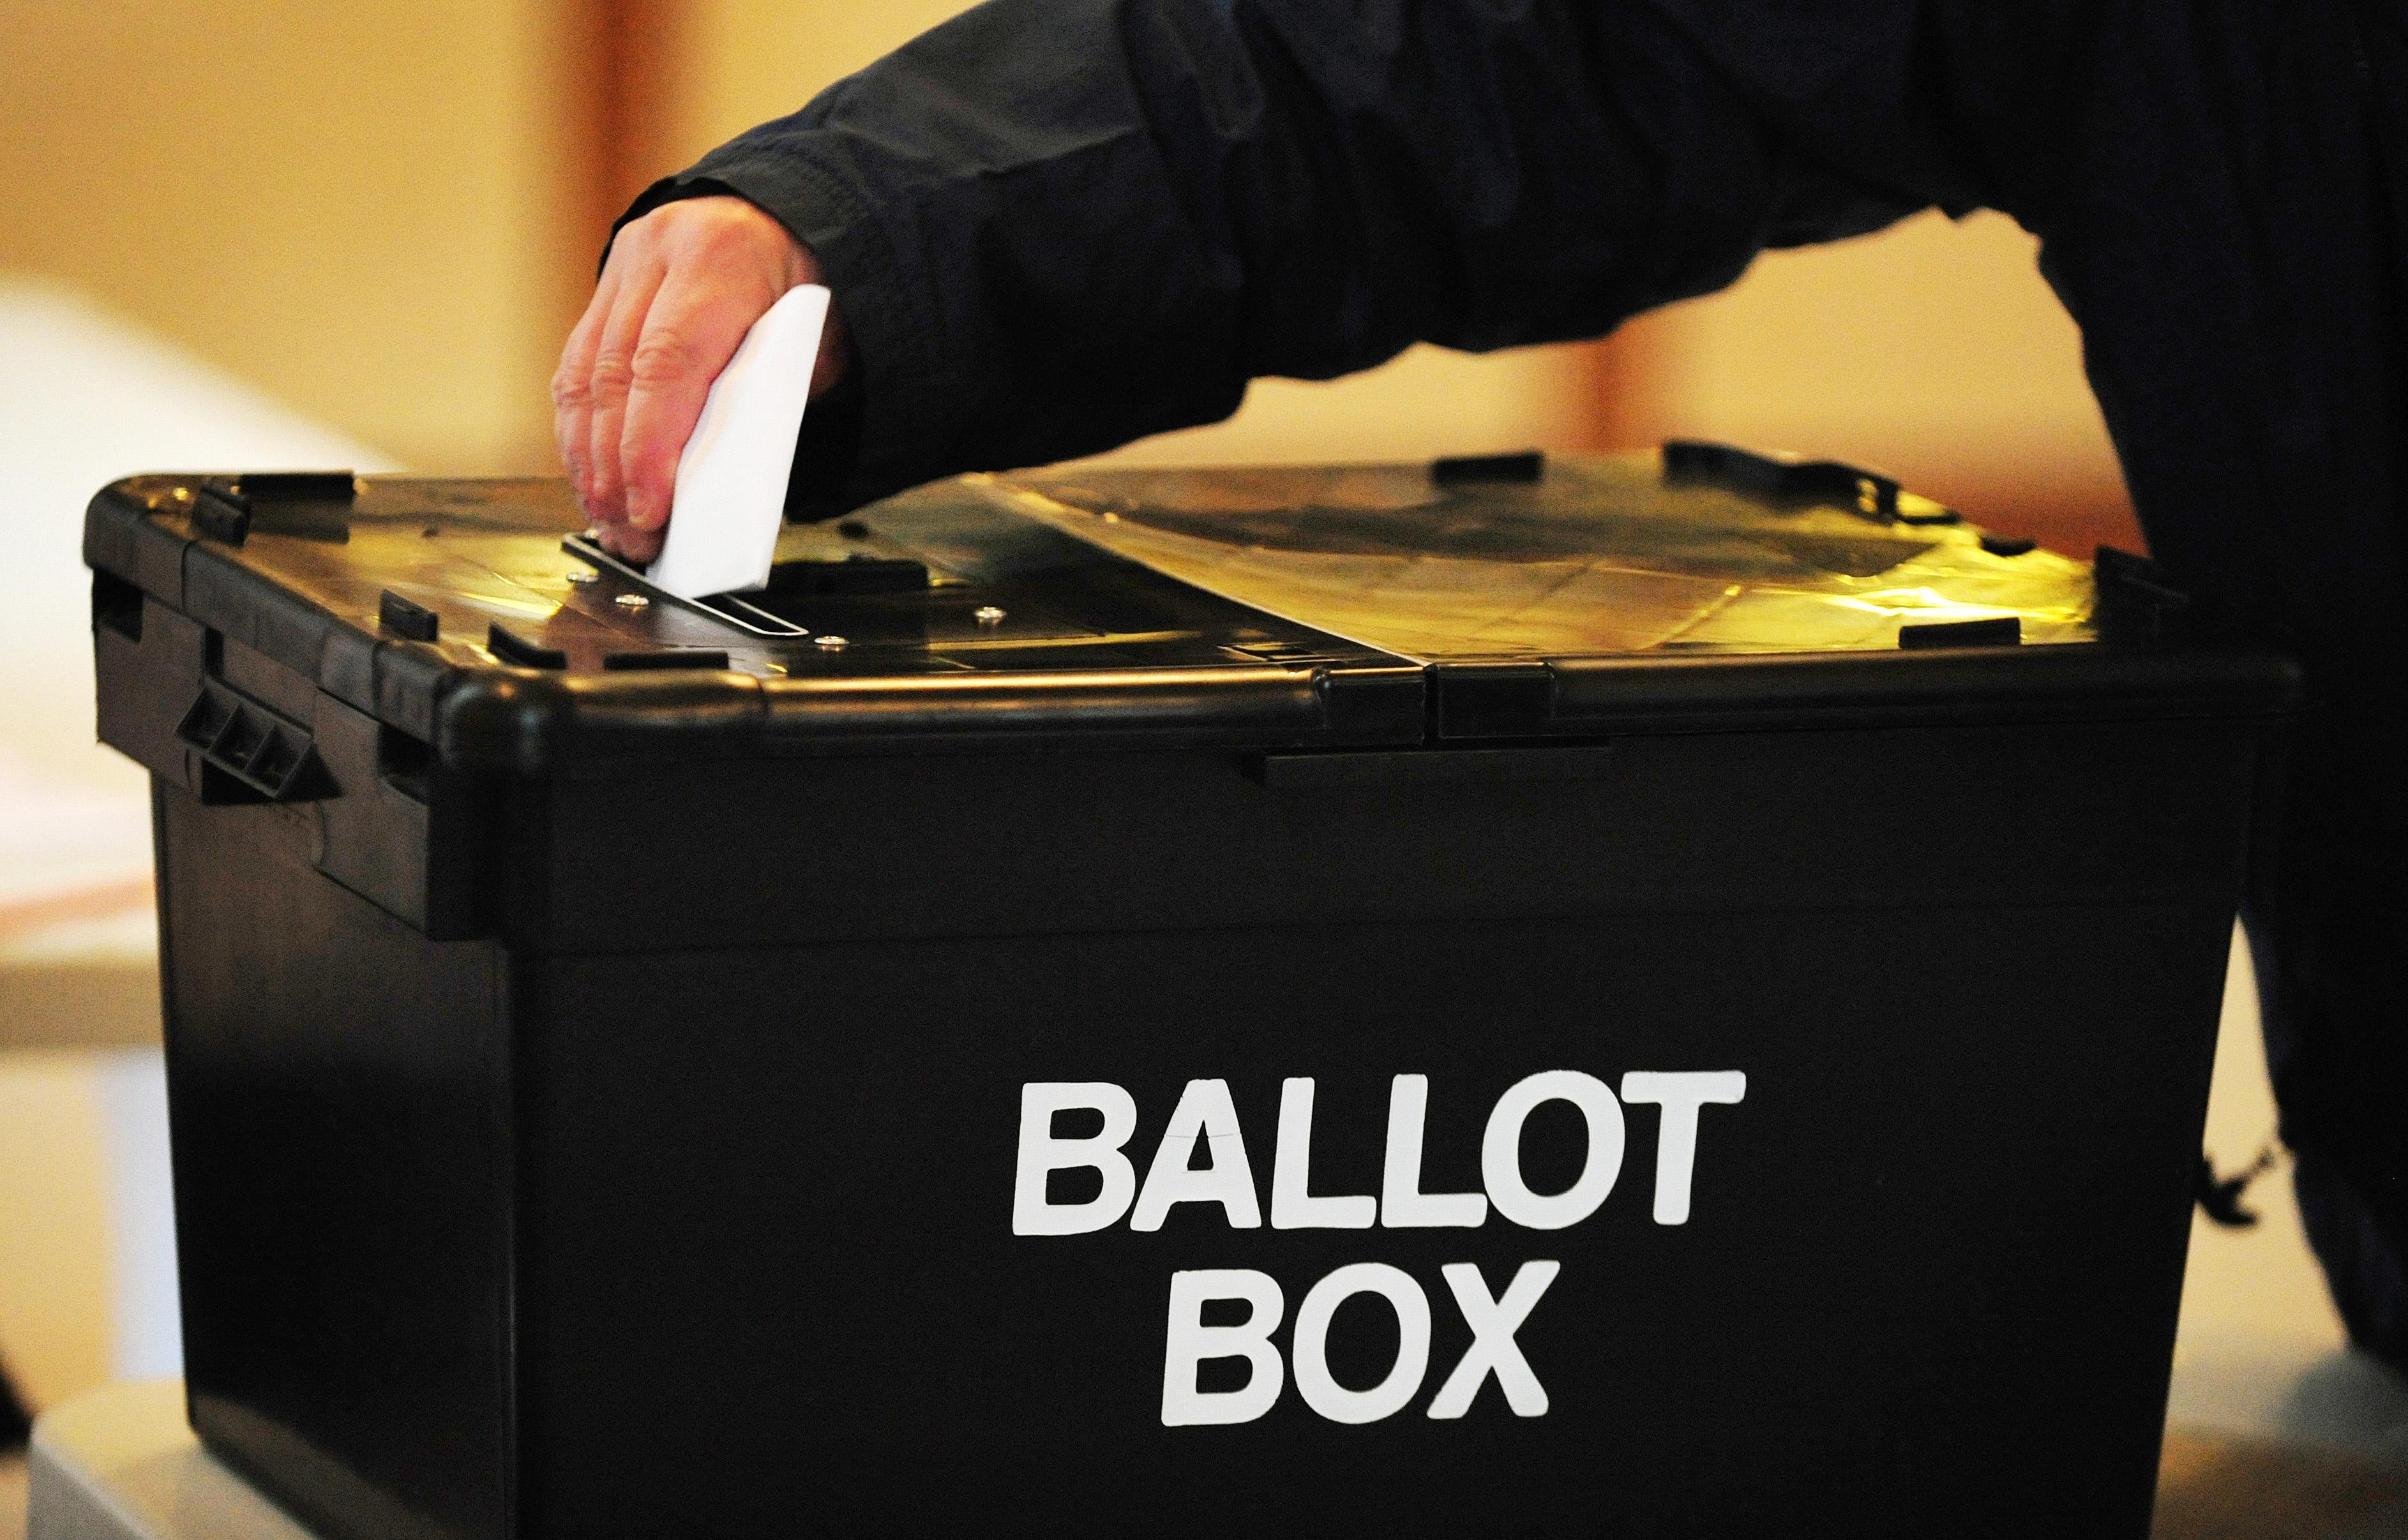 Ballots are taking place this Thursday in all four nations of the UK